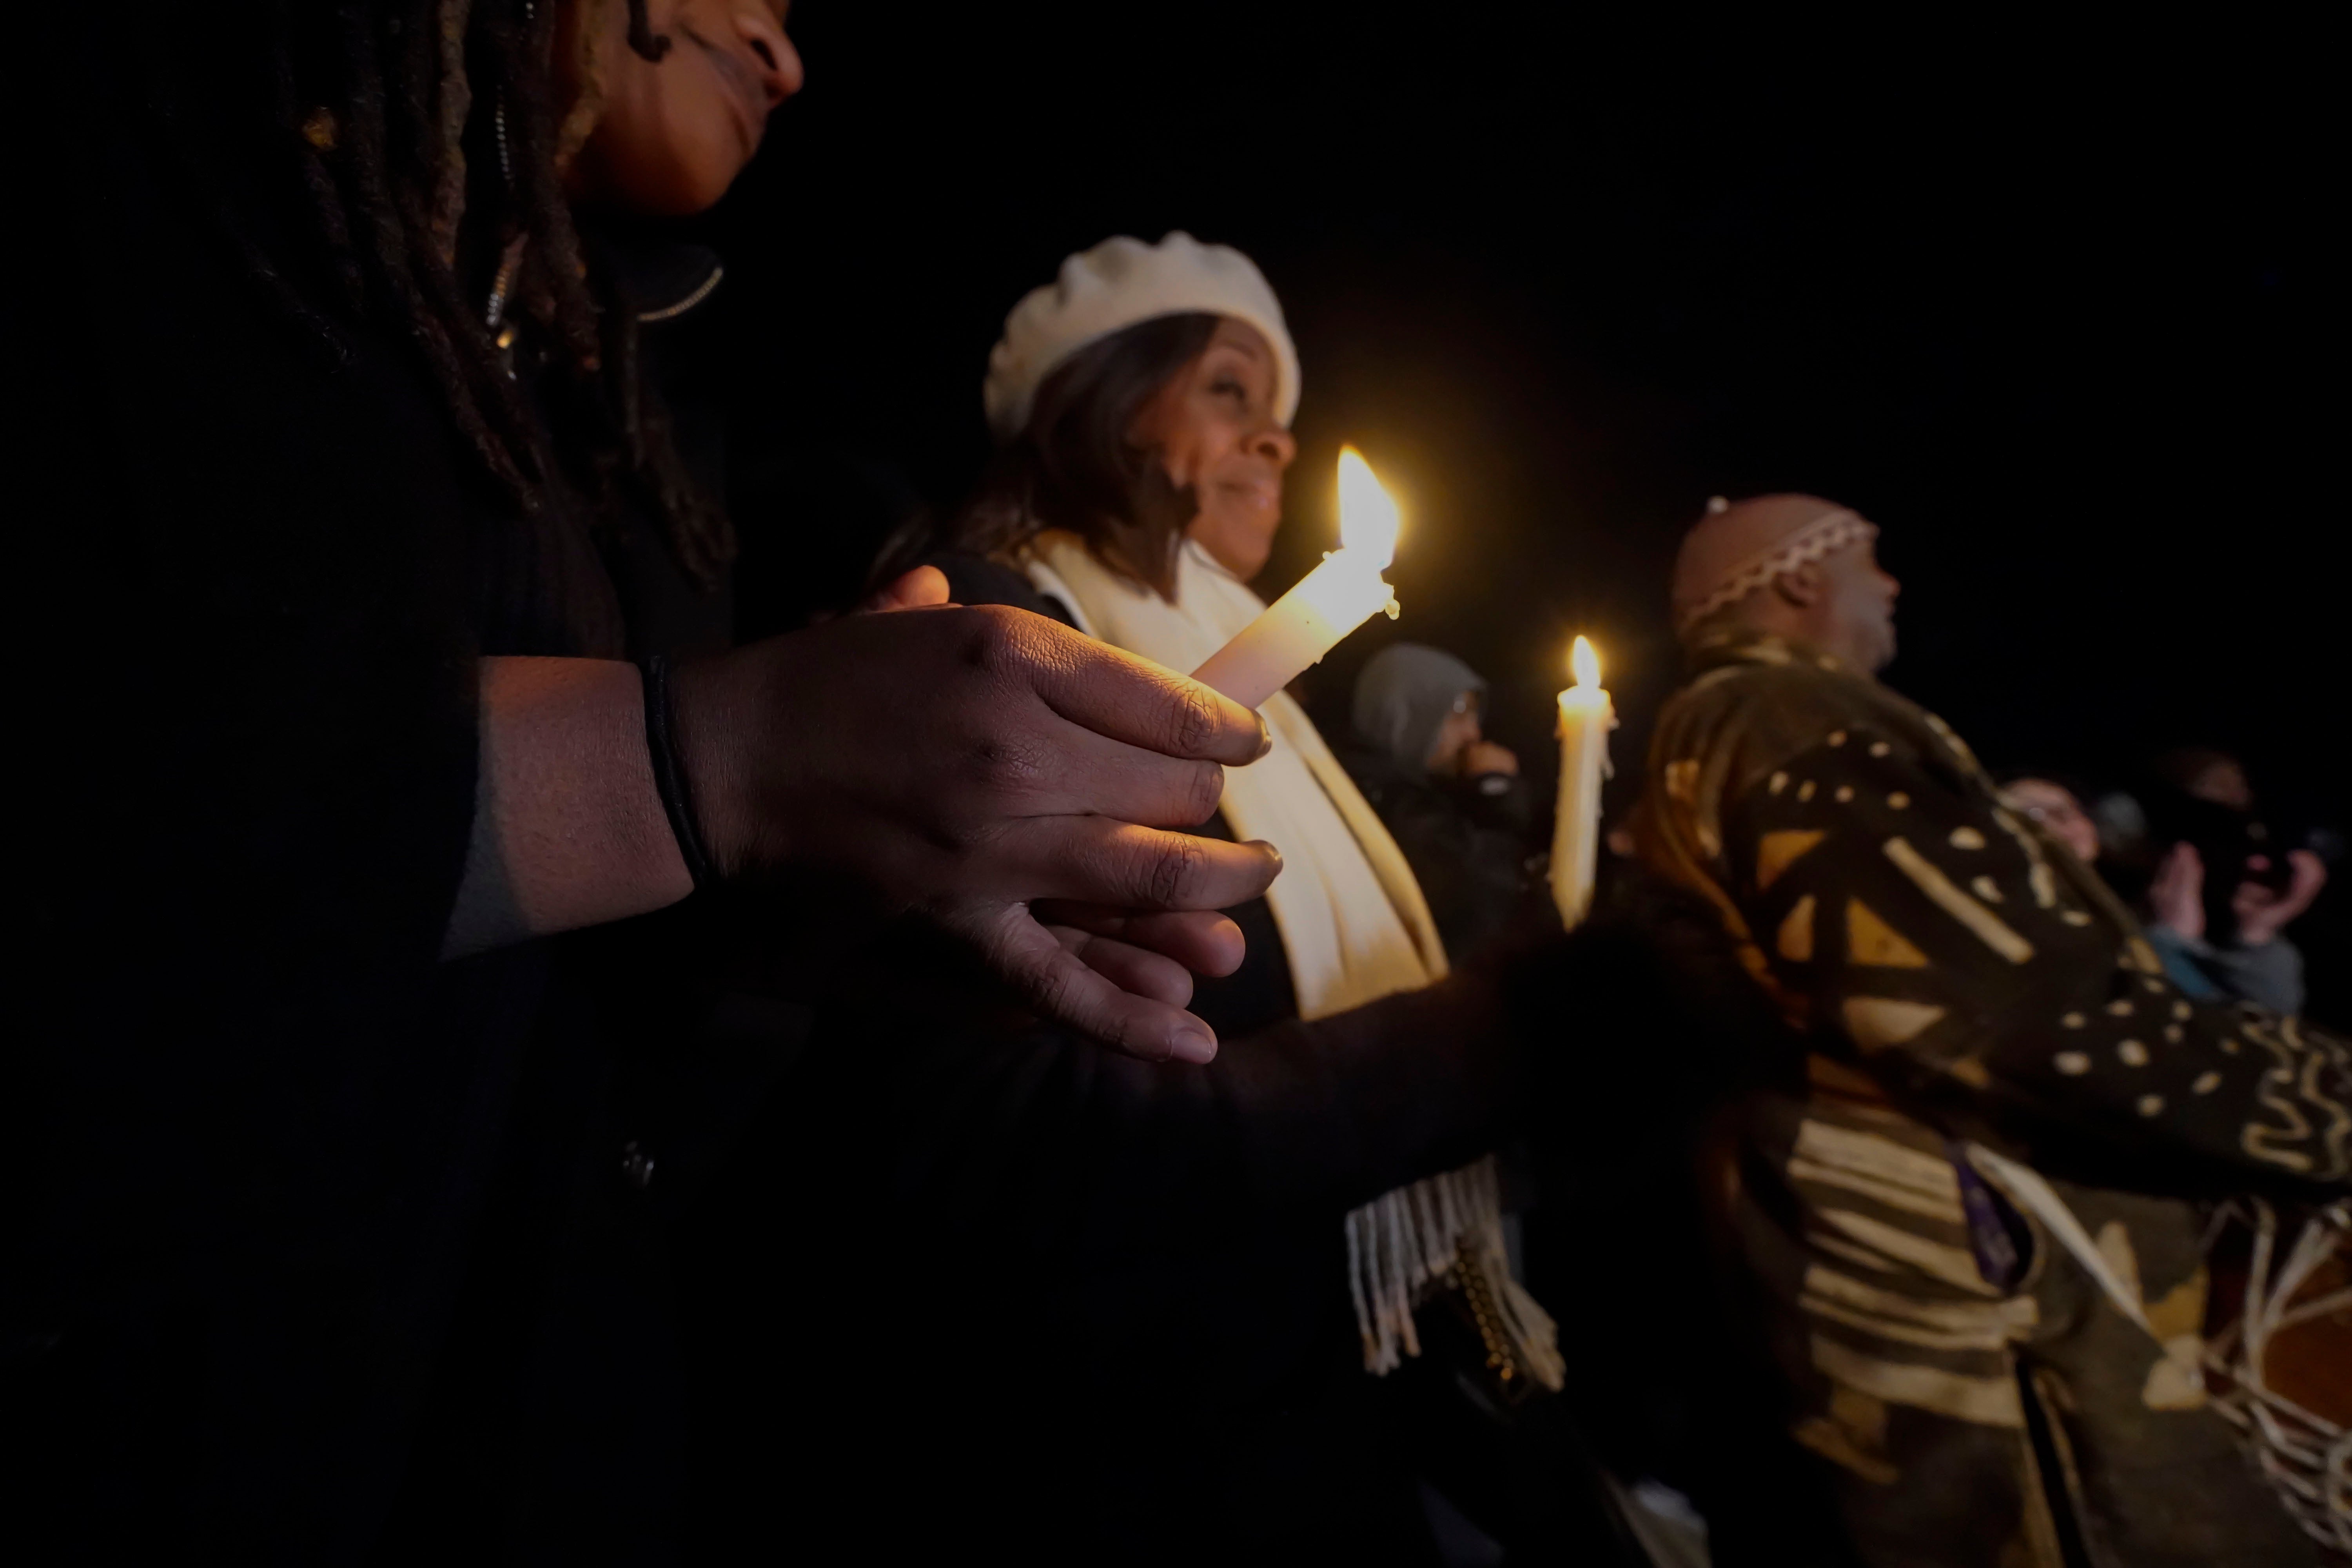 People hold candles at a vigil for Tyre Nichols in Memphis, Tennessee